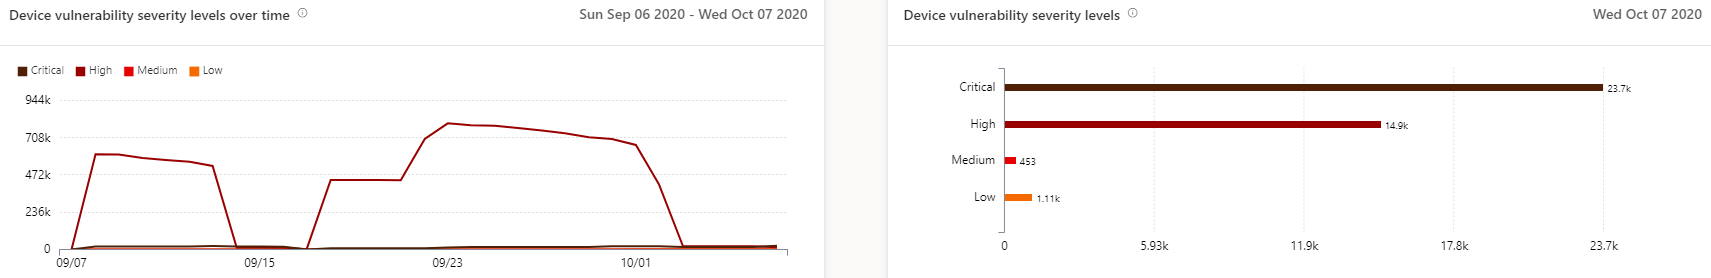 One graph of current device vulnerability severity levels, and one graph showing levels over time.